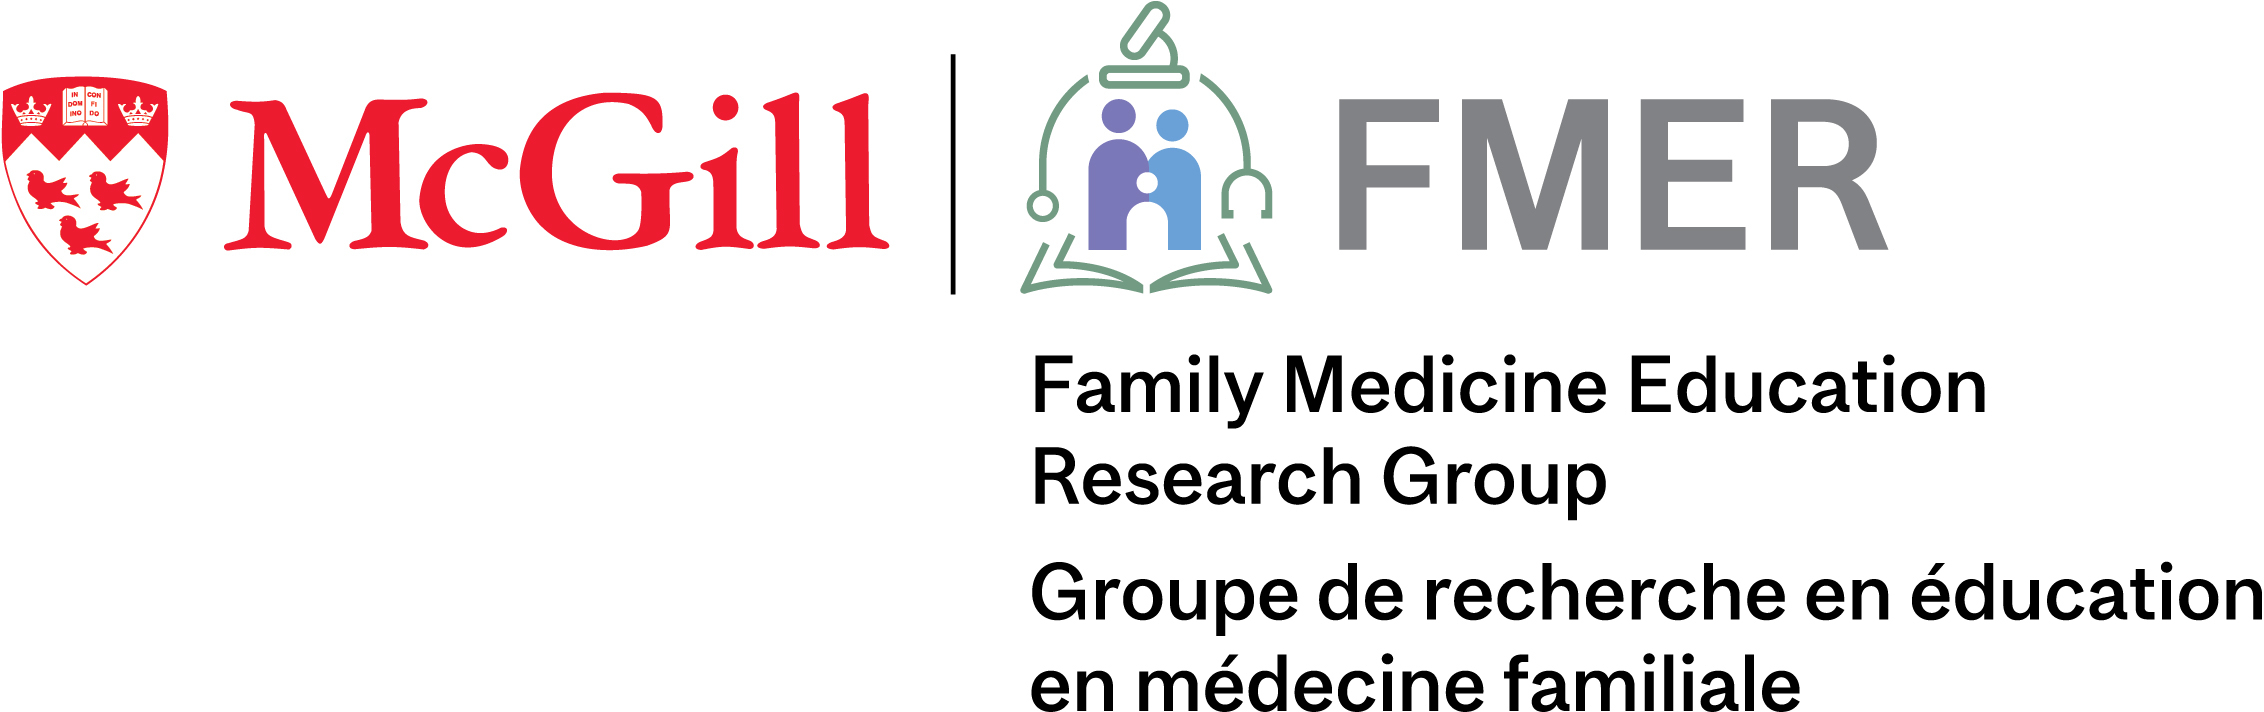 Family Medicine Education Research